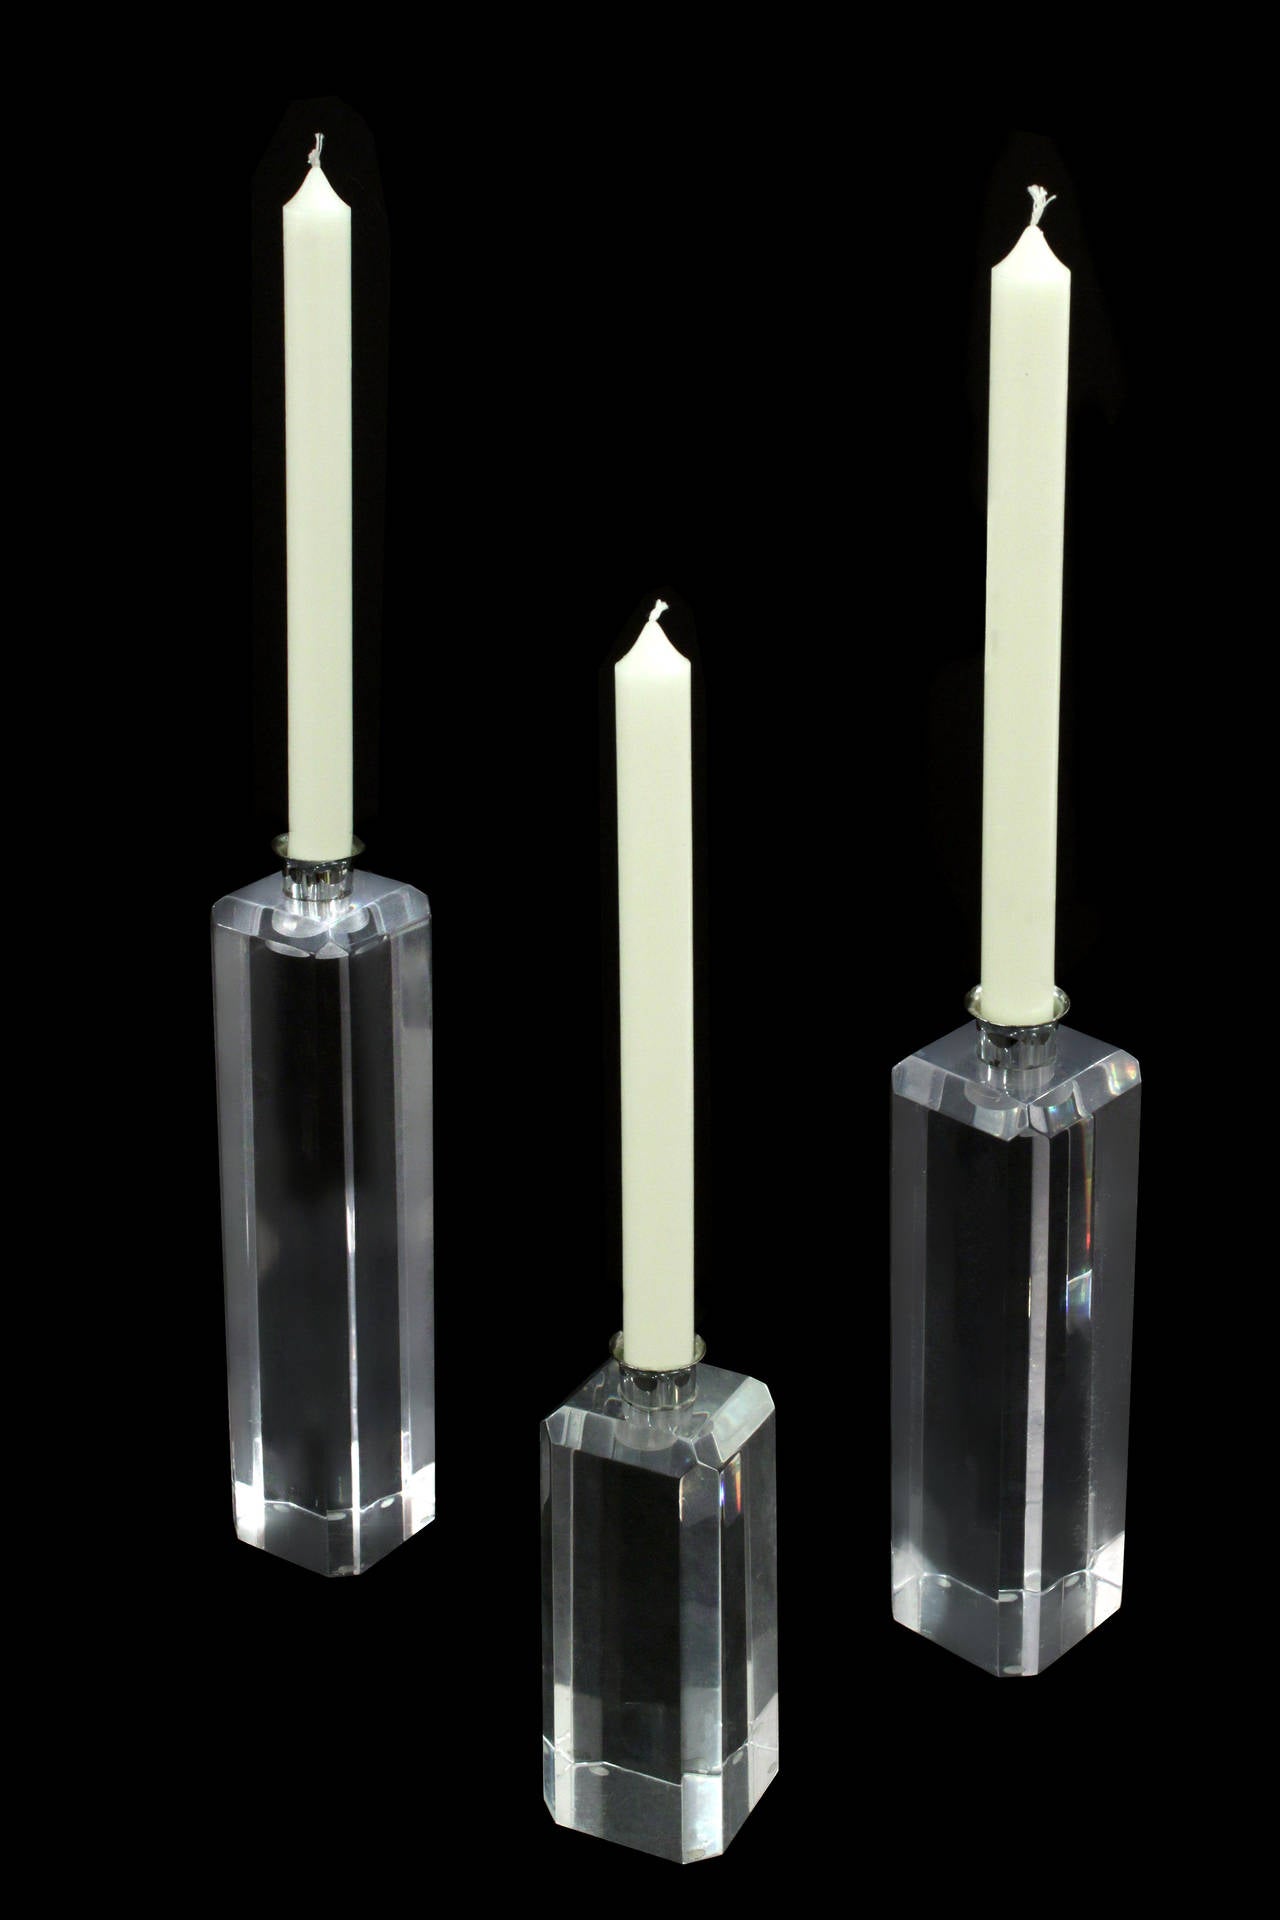 Set of three candlestick holders in Lucite and chrome, American, 1970s.

Heights of smaller candlestick holders: 
6 and 8 inches high.